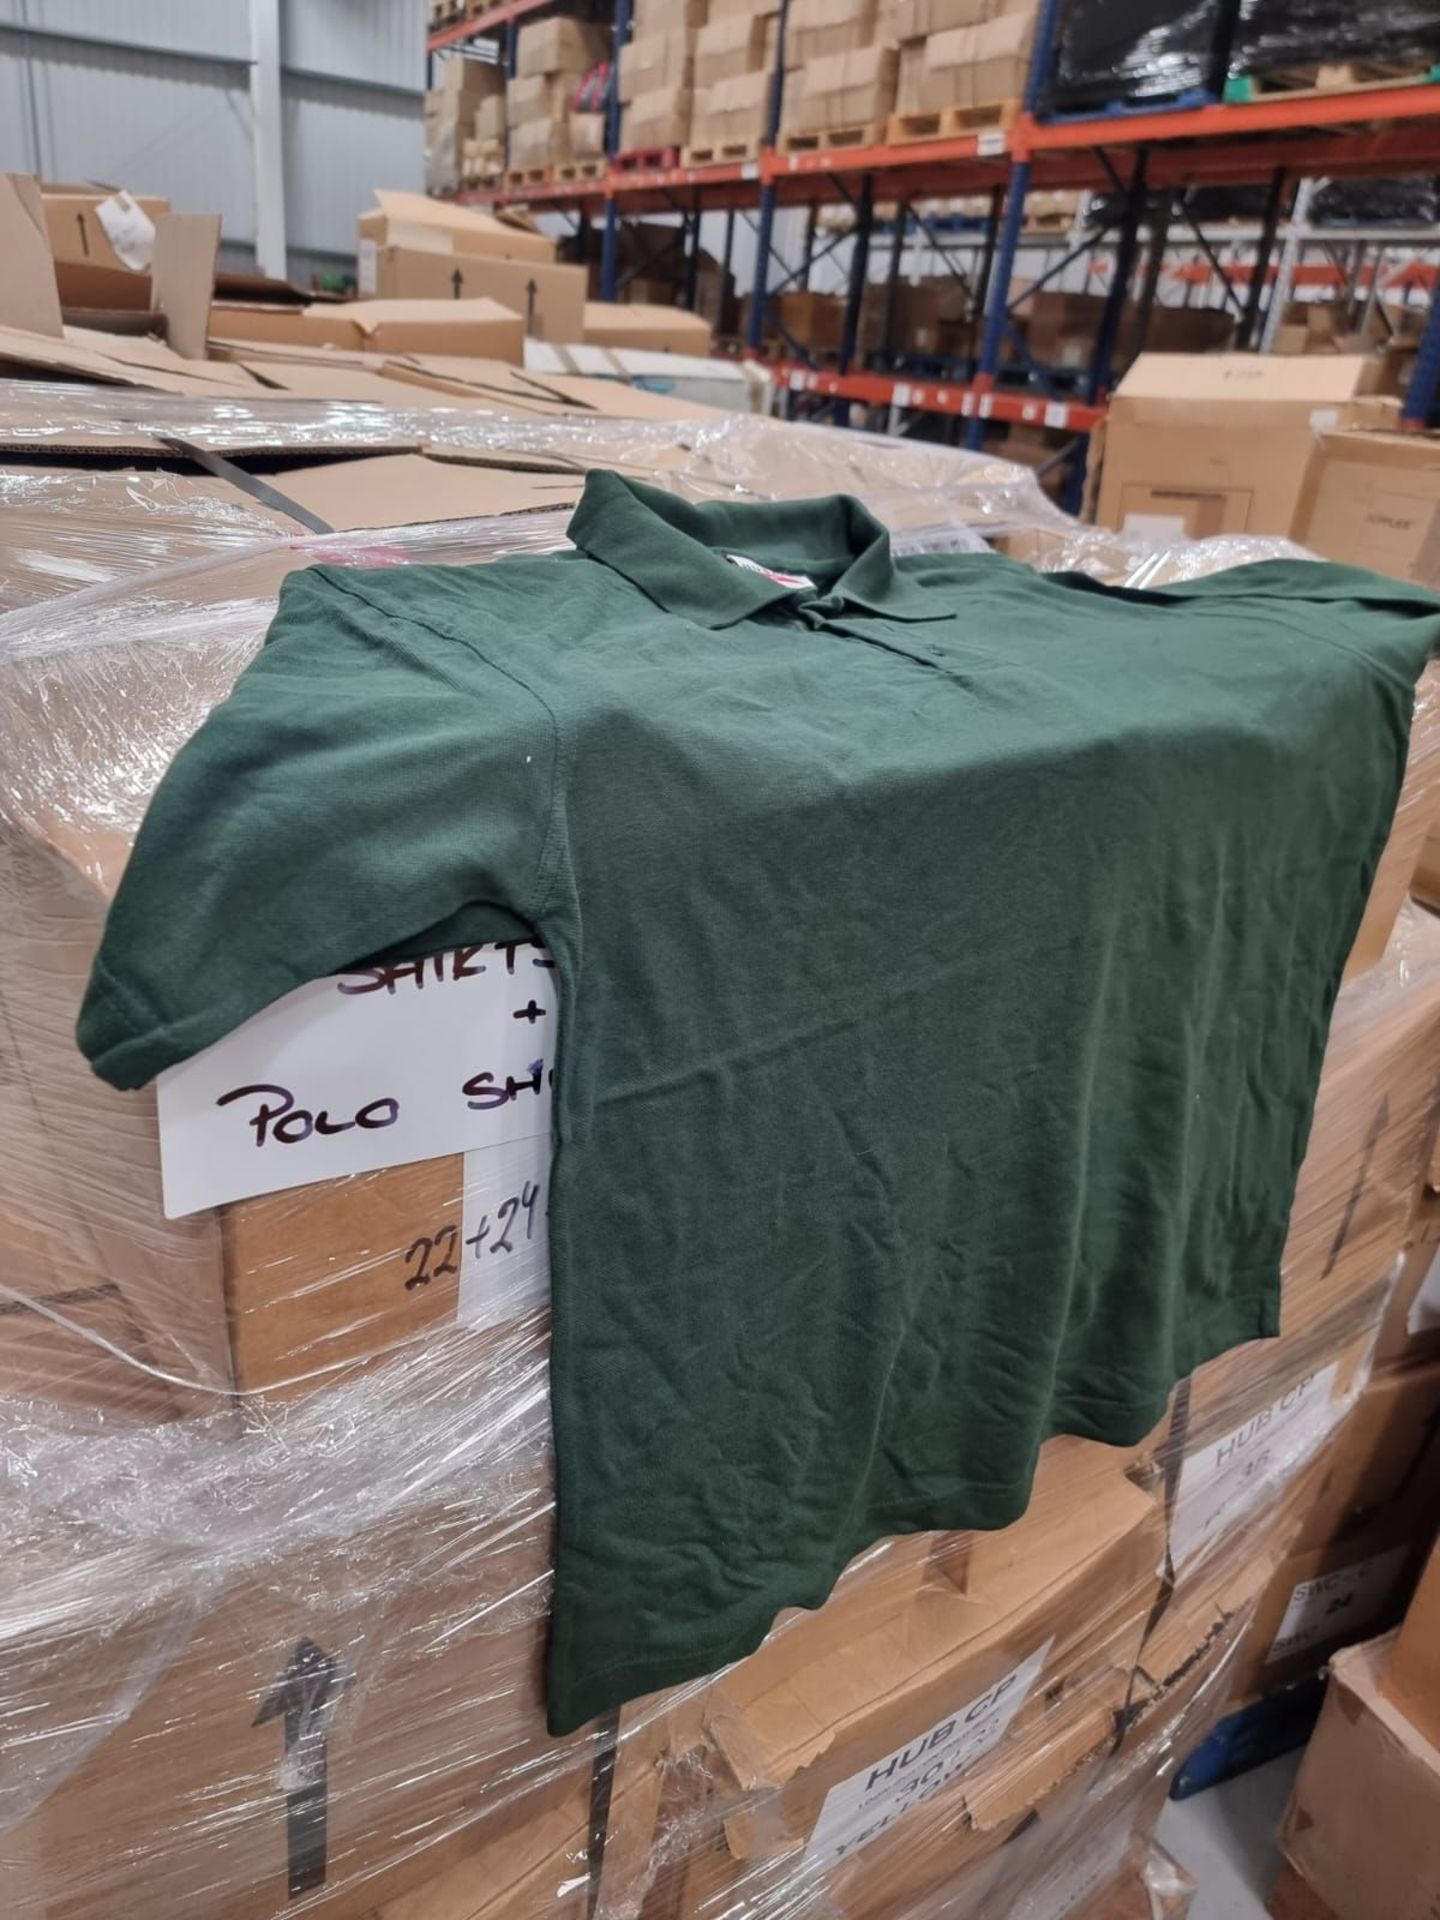 PALLET TO CONTAIN A LARGE QUANTITY OF NEW CLOTHING GOODS. MAY INCLUDE ITEMS SUCH AS: T-SHIRTS, - Image 13 of 28